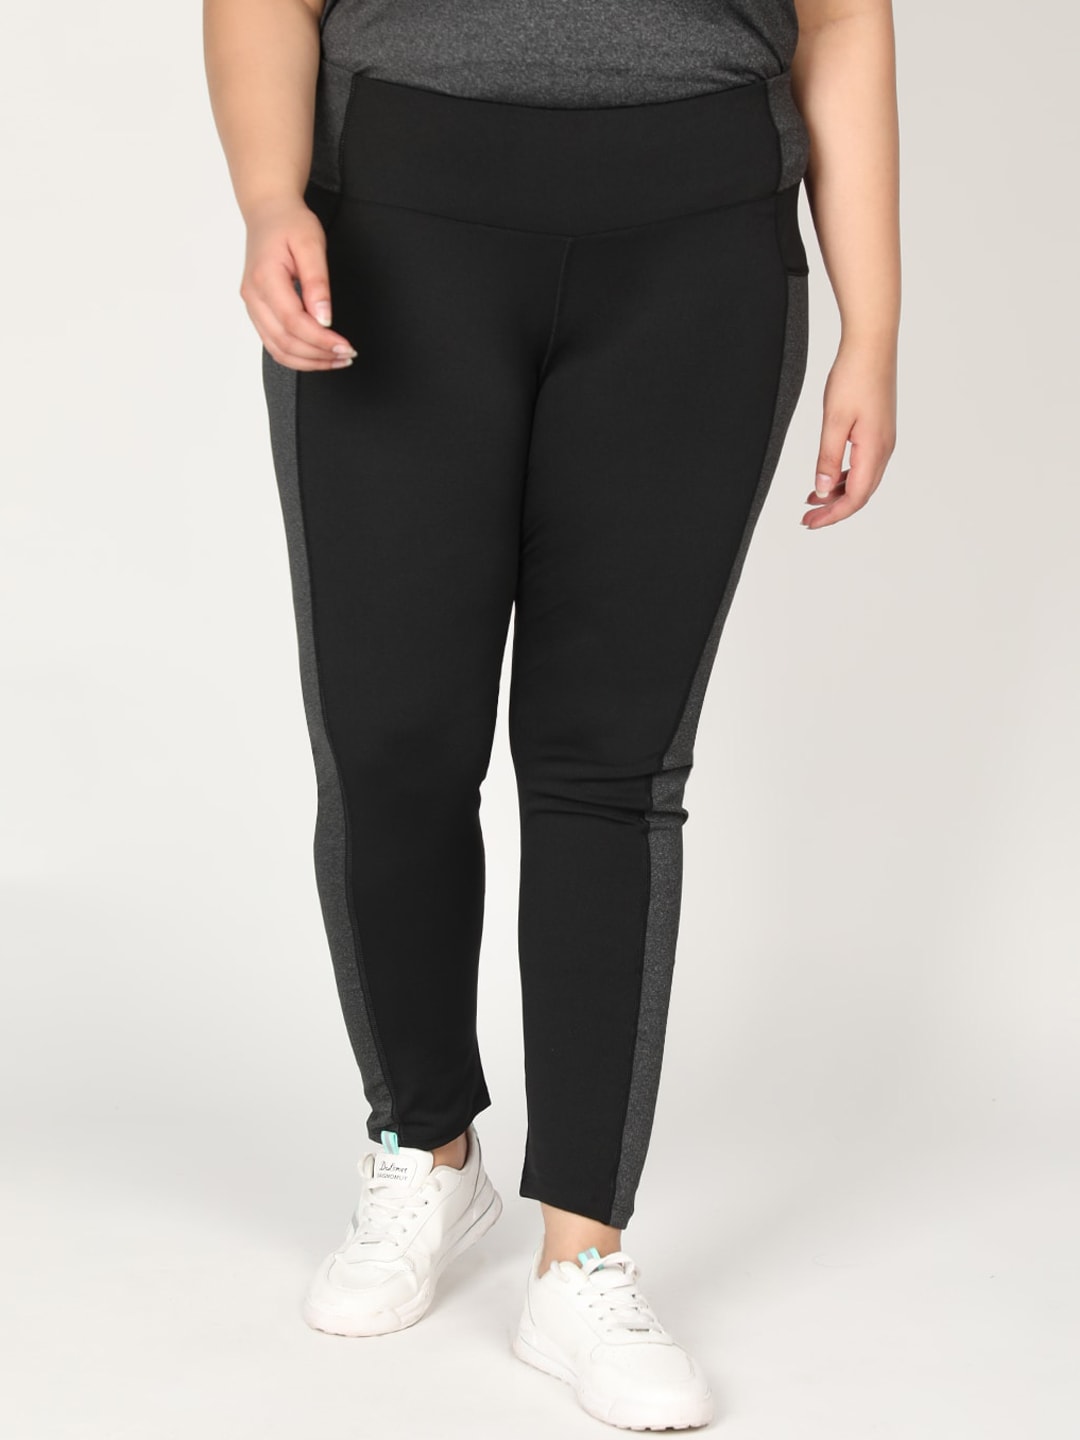 CHKOKKO Plus Women Grey Solid Skinny-Fit Training Tights Price in India